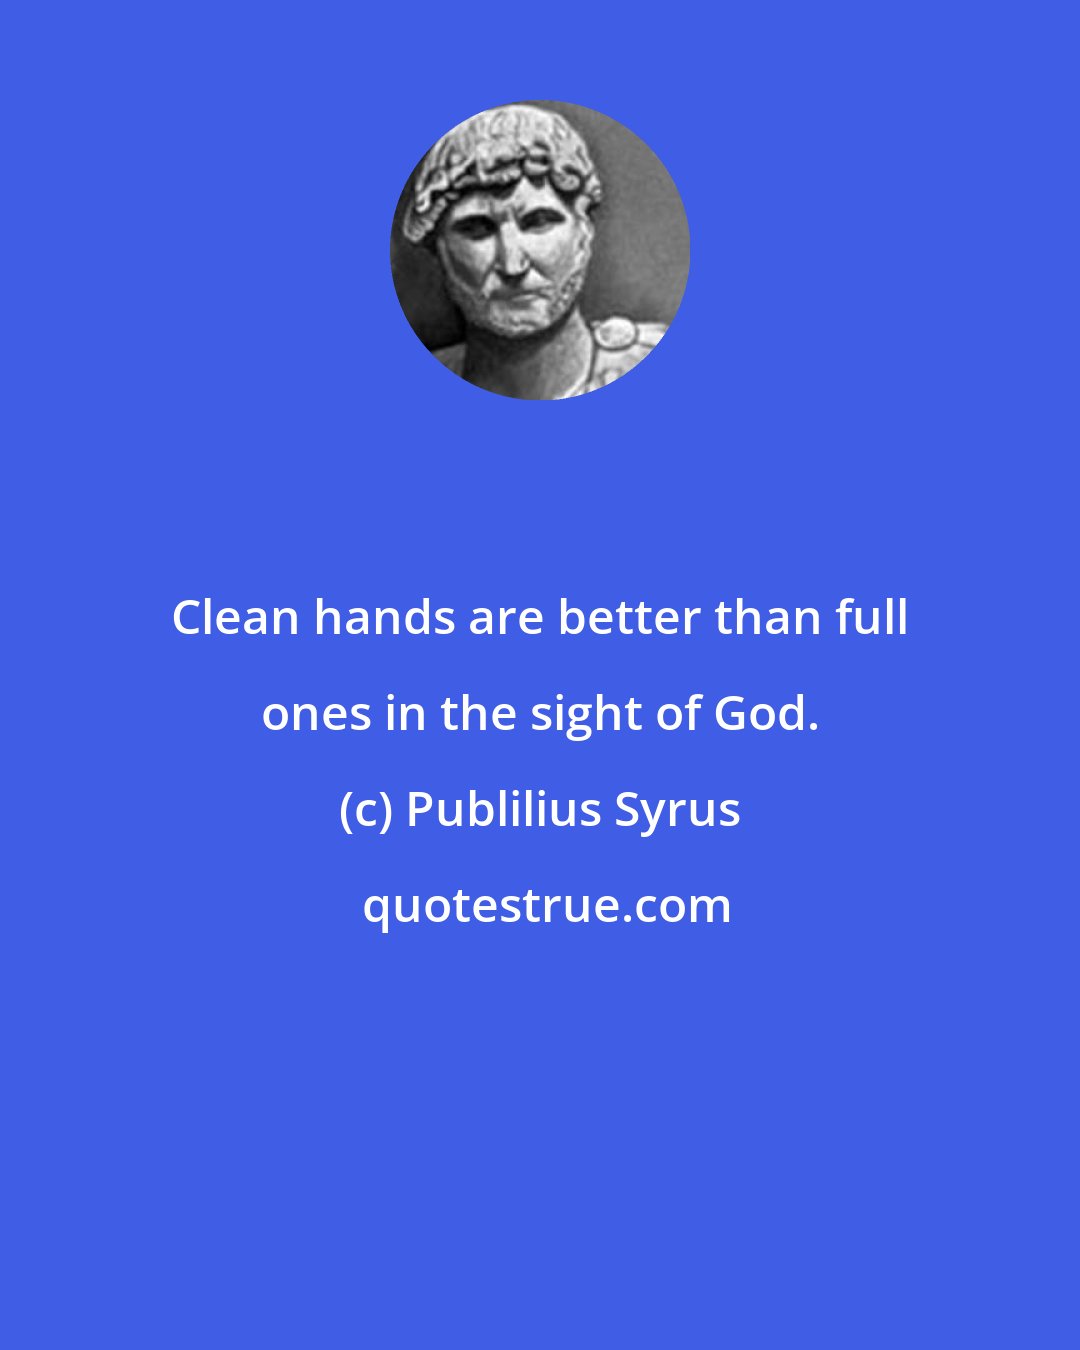 Publilius Syrus: Clean hands are better than full ones in the sight of God.